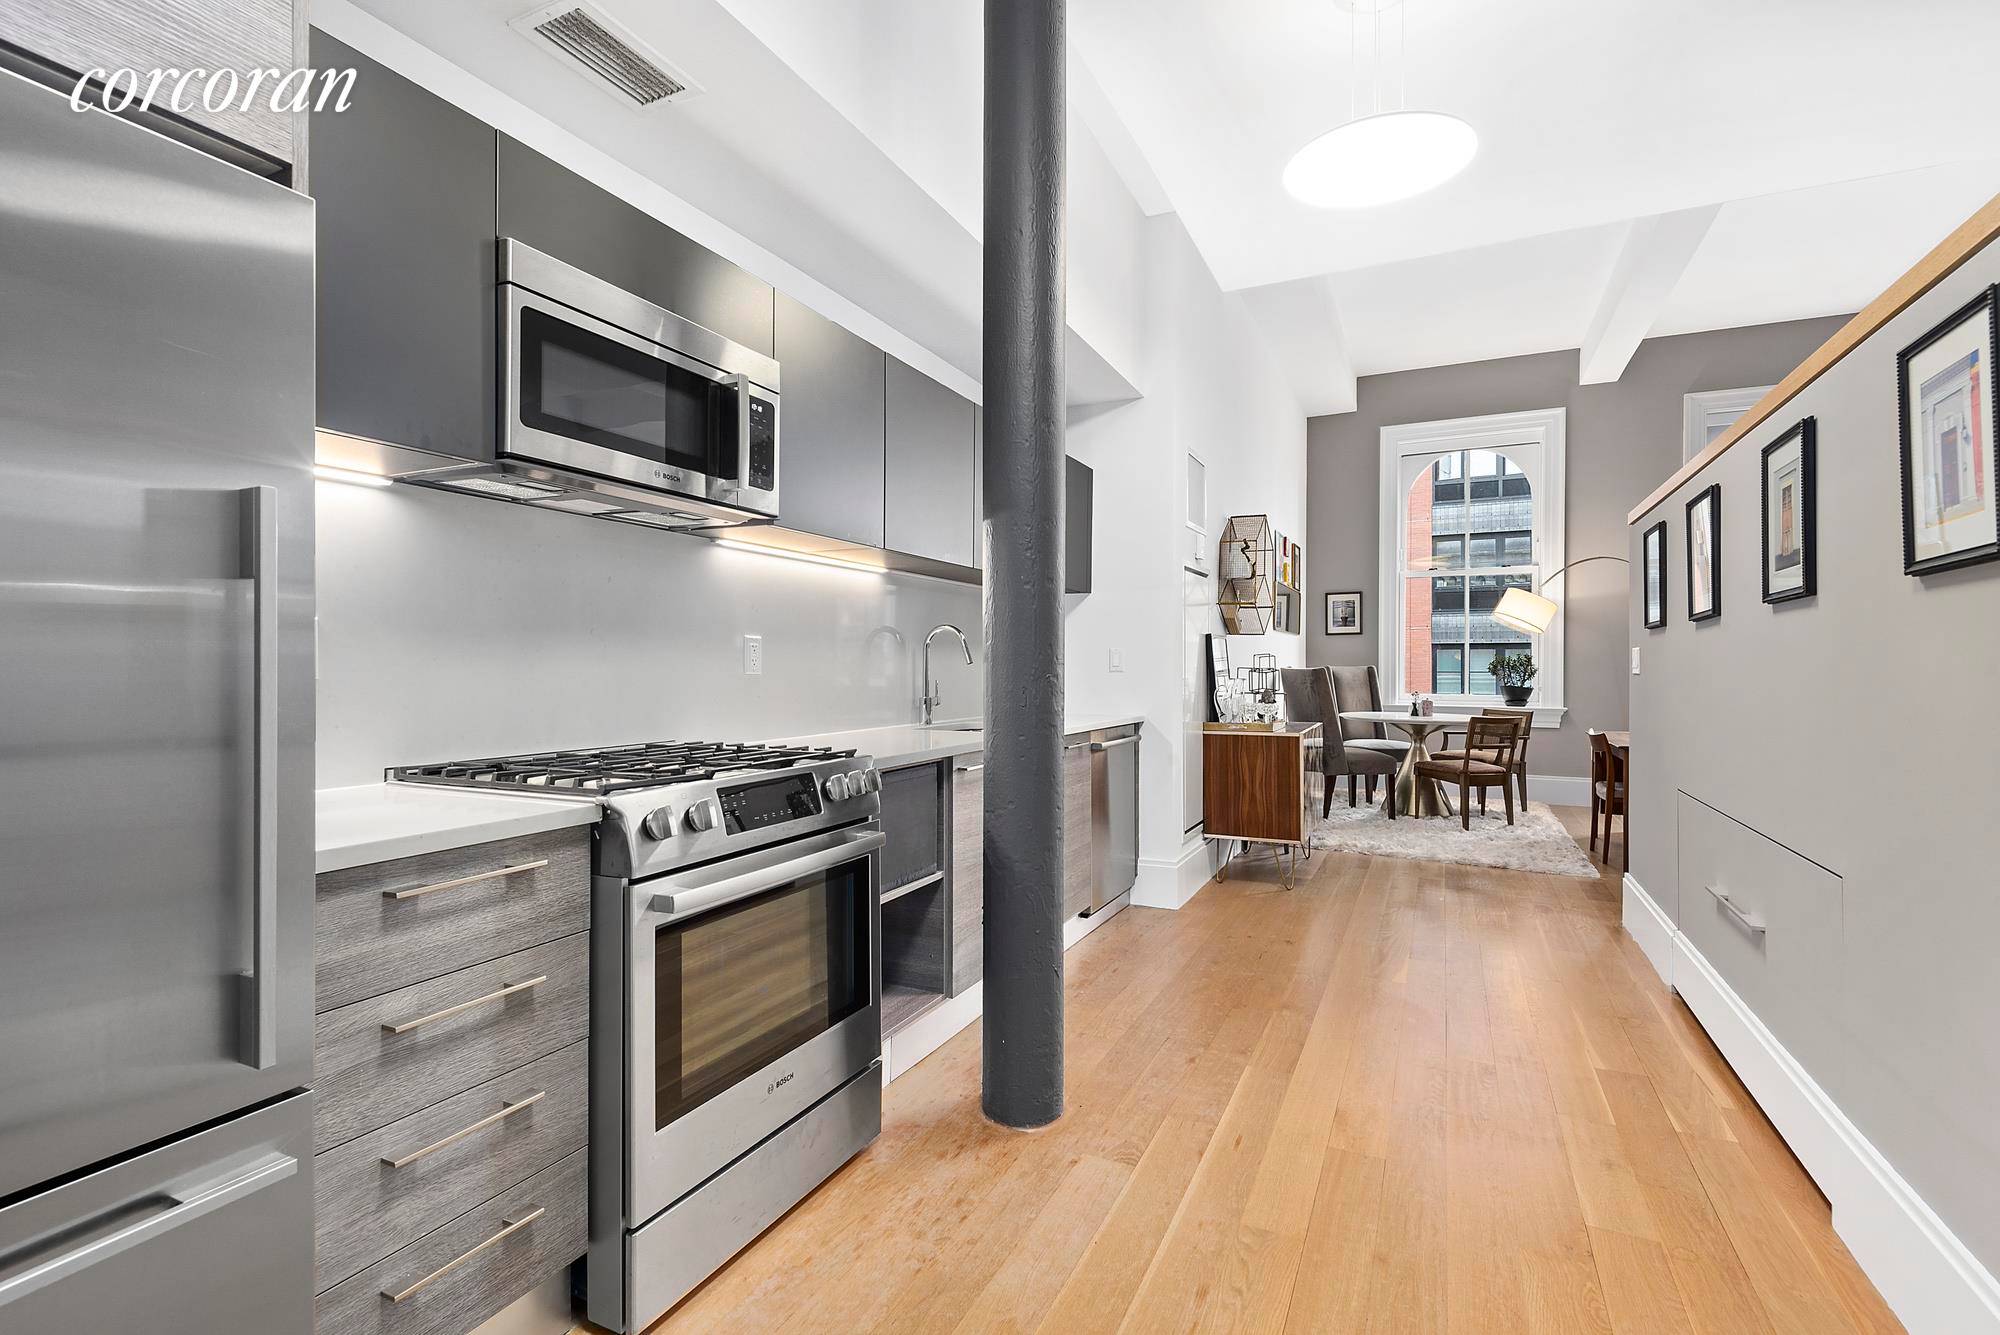 Sublease this gorgeous loft in one of the most unique buildings in Downtown Brooklyn.